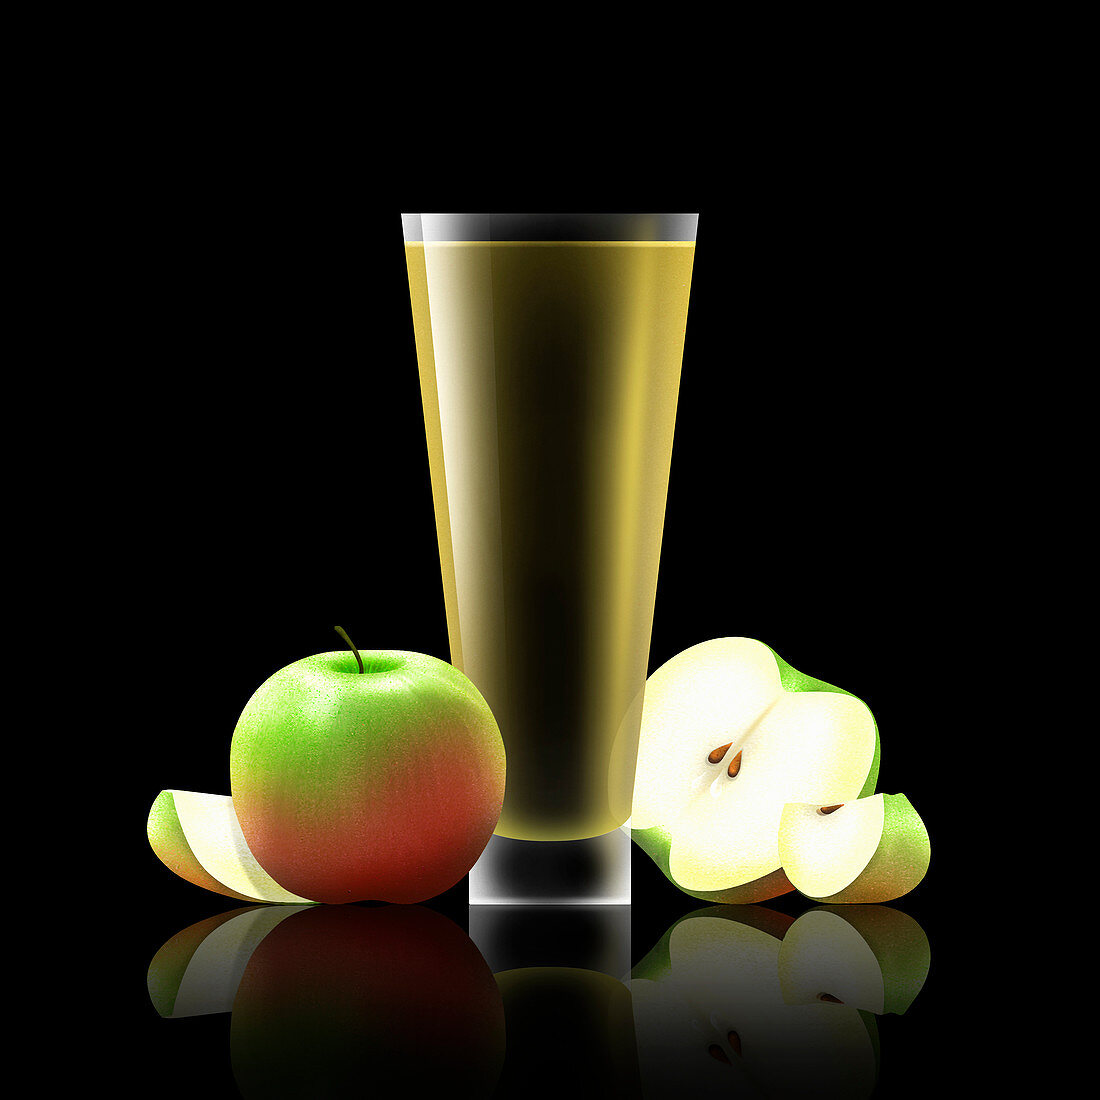 Fresh apples and glass of apple juice, illustration